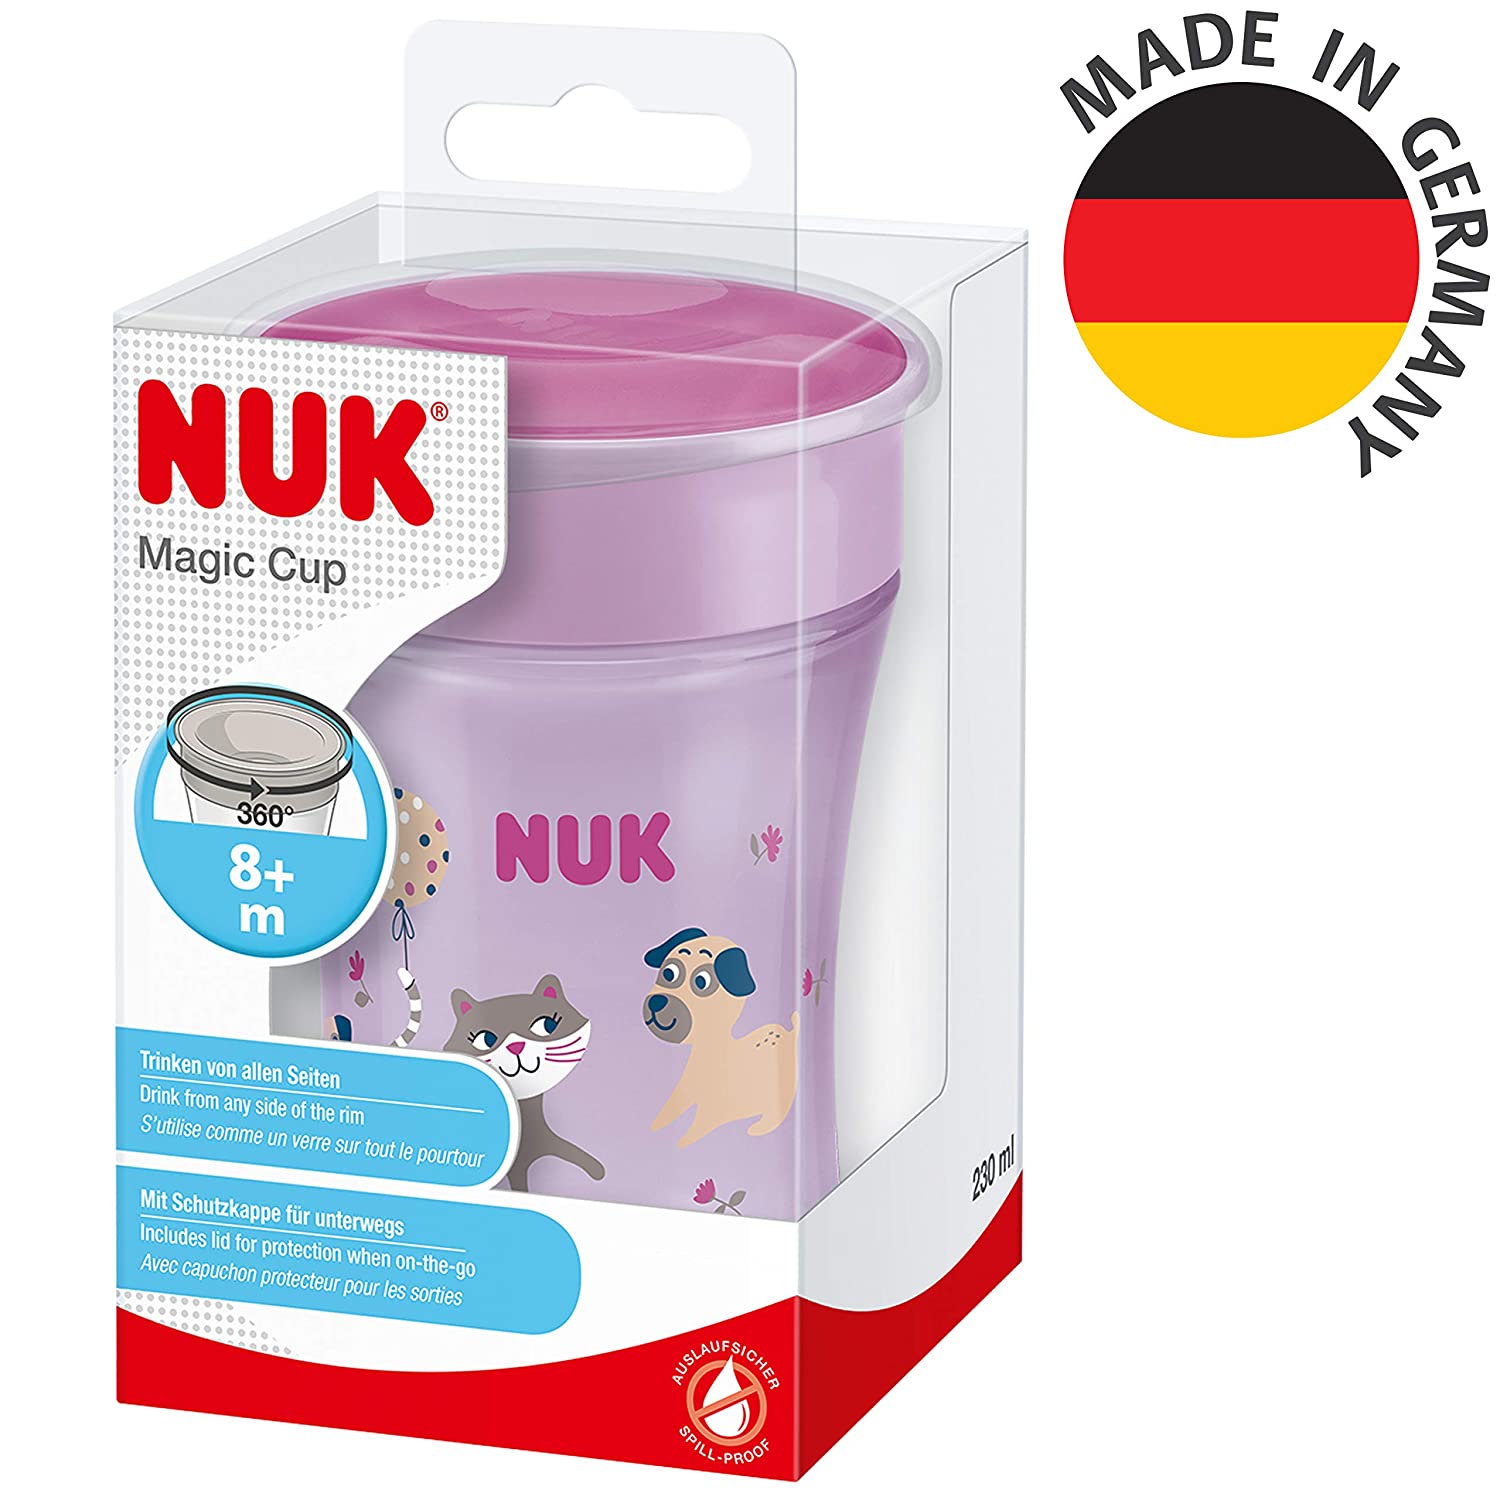 NUK Magic Cup learning cup | leak-proof 360 ° drinking rim | 8+ months | BPA free | 230 ml | Dog / cat (purple)